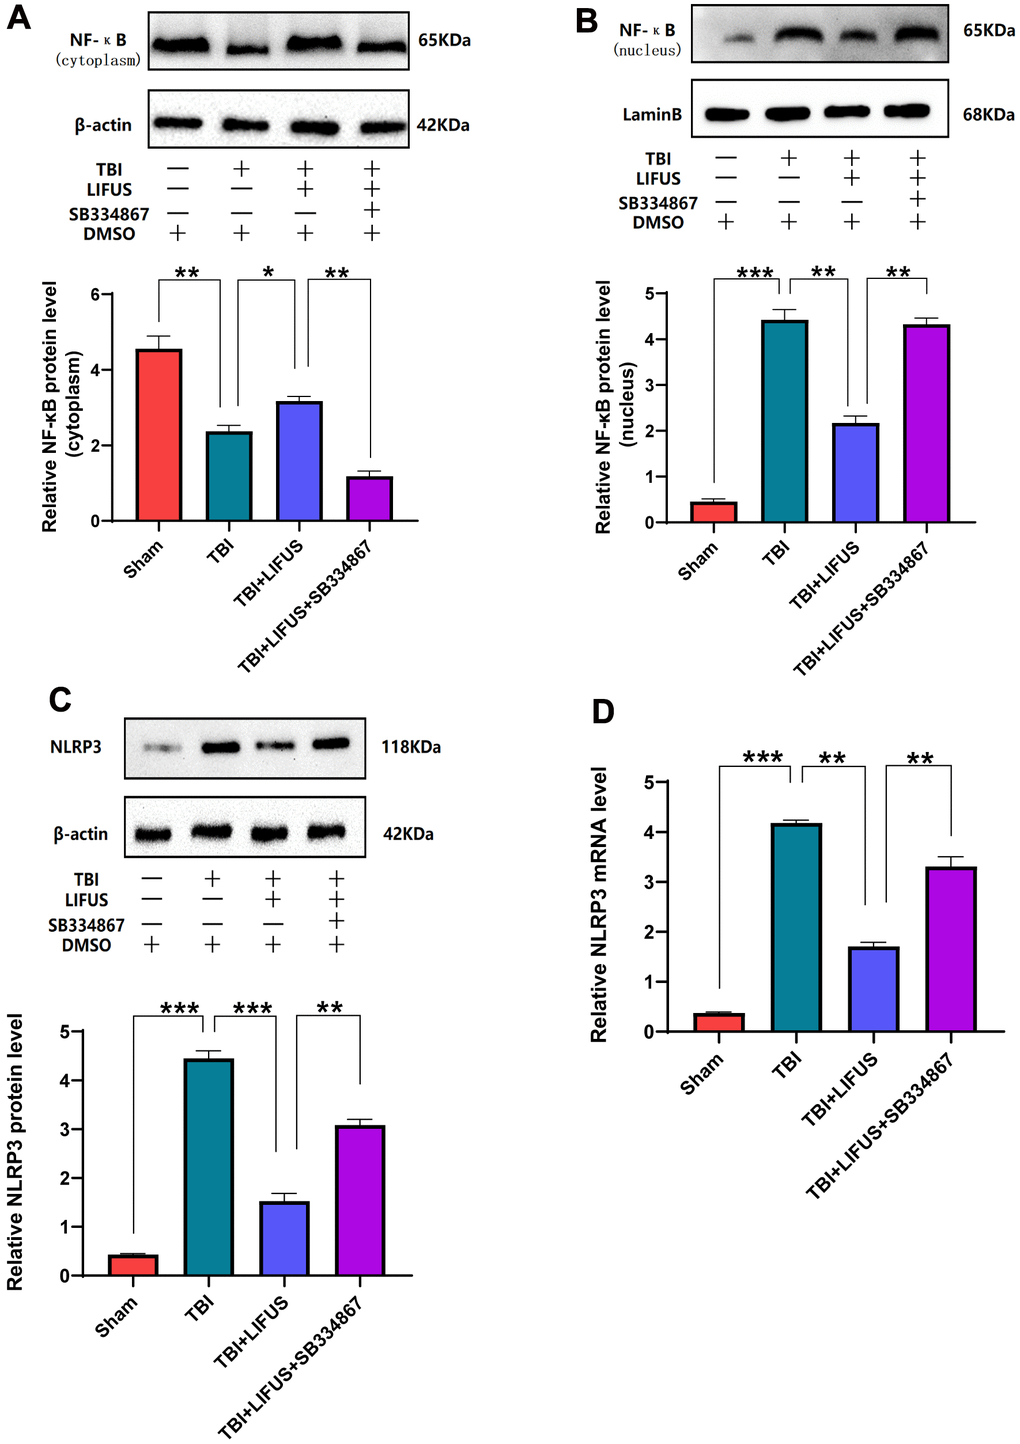 Low-intensity focused ultrasound (LIFUS) inhibited the activation of NF-κB (nuclear factor κB) and nucleotide-binding domain-like receptor protein 3 (NLRP3) inflammasome after traumatic brain injury (TBI) by orexin-A (OX-A). (A) NF-κB protein levels in the cytoplasm. (B) NF-κB protein levels in the nucleus. (C) Protein levels of NLRP3. (D) NLRP3 corresponding mRNA levels (n=6, SD; *P 